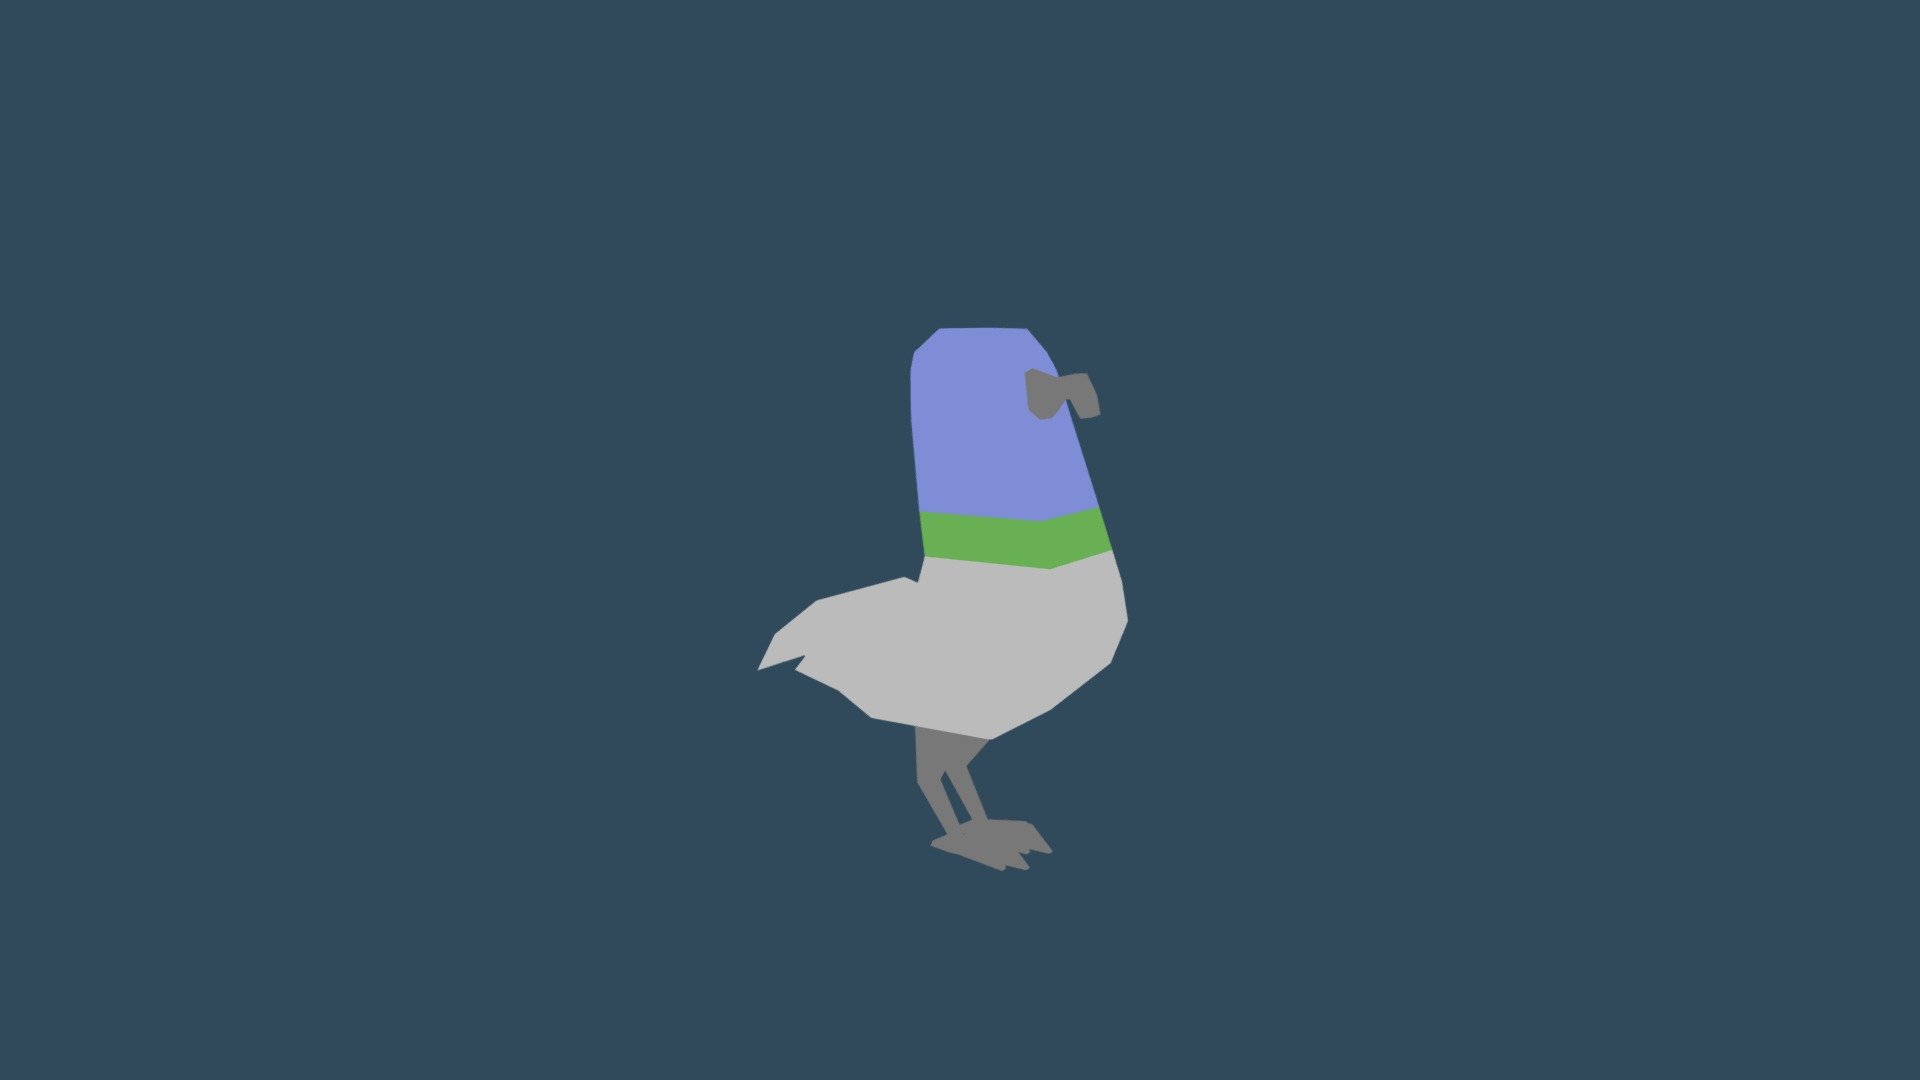 "The Pigeon" 3D Low Poly Model